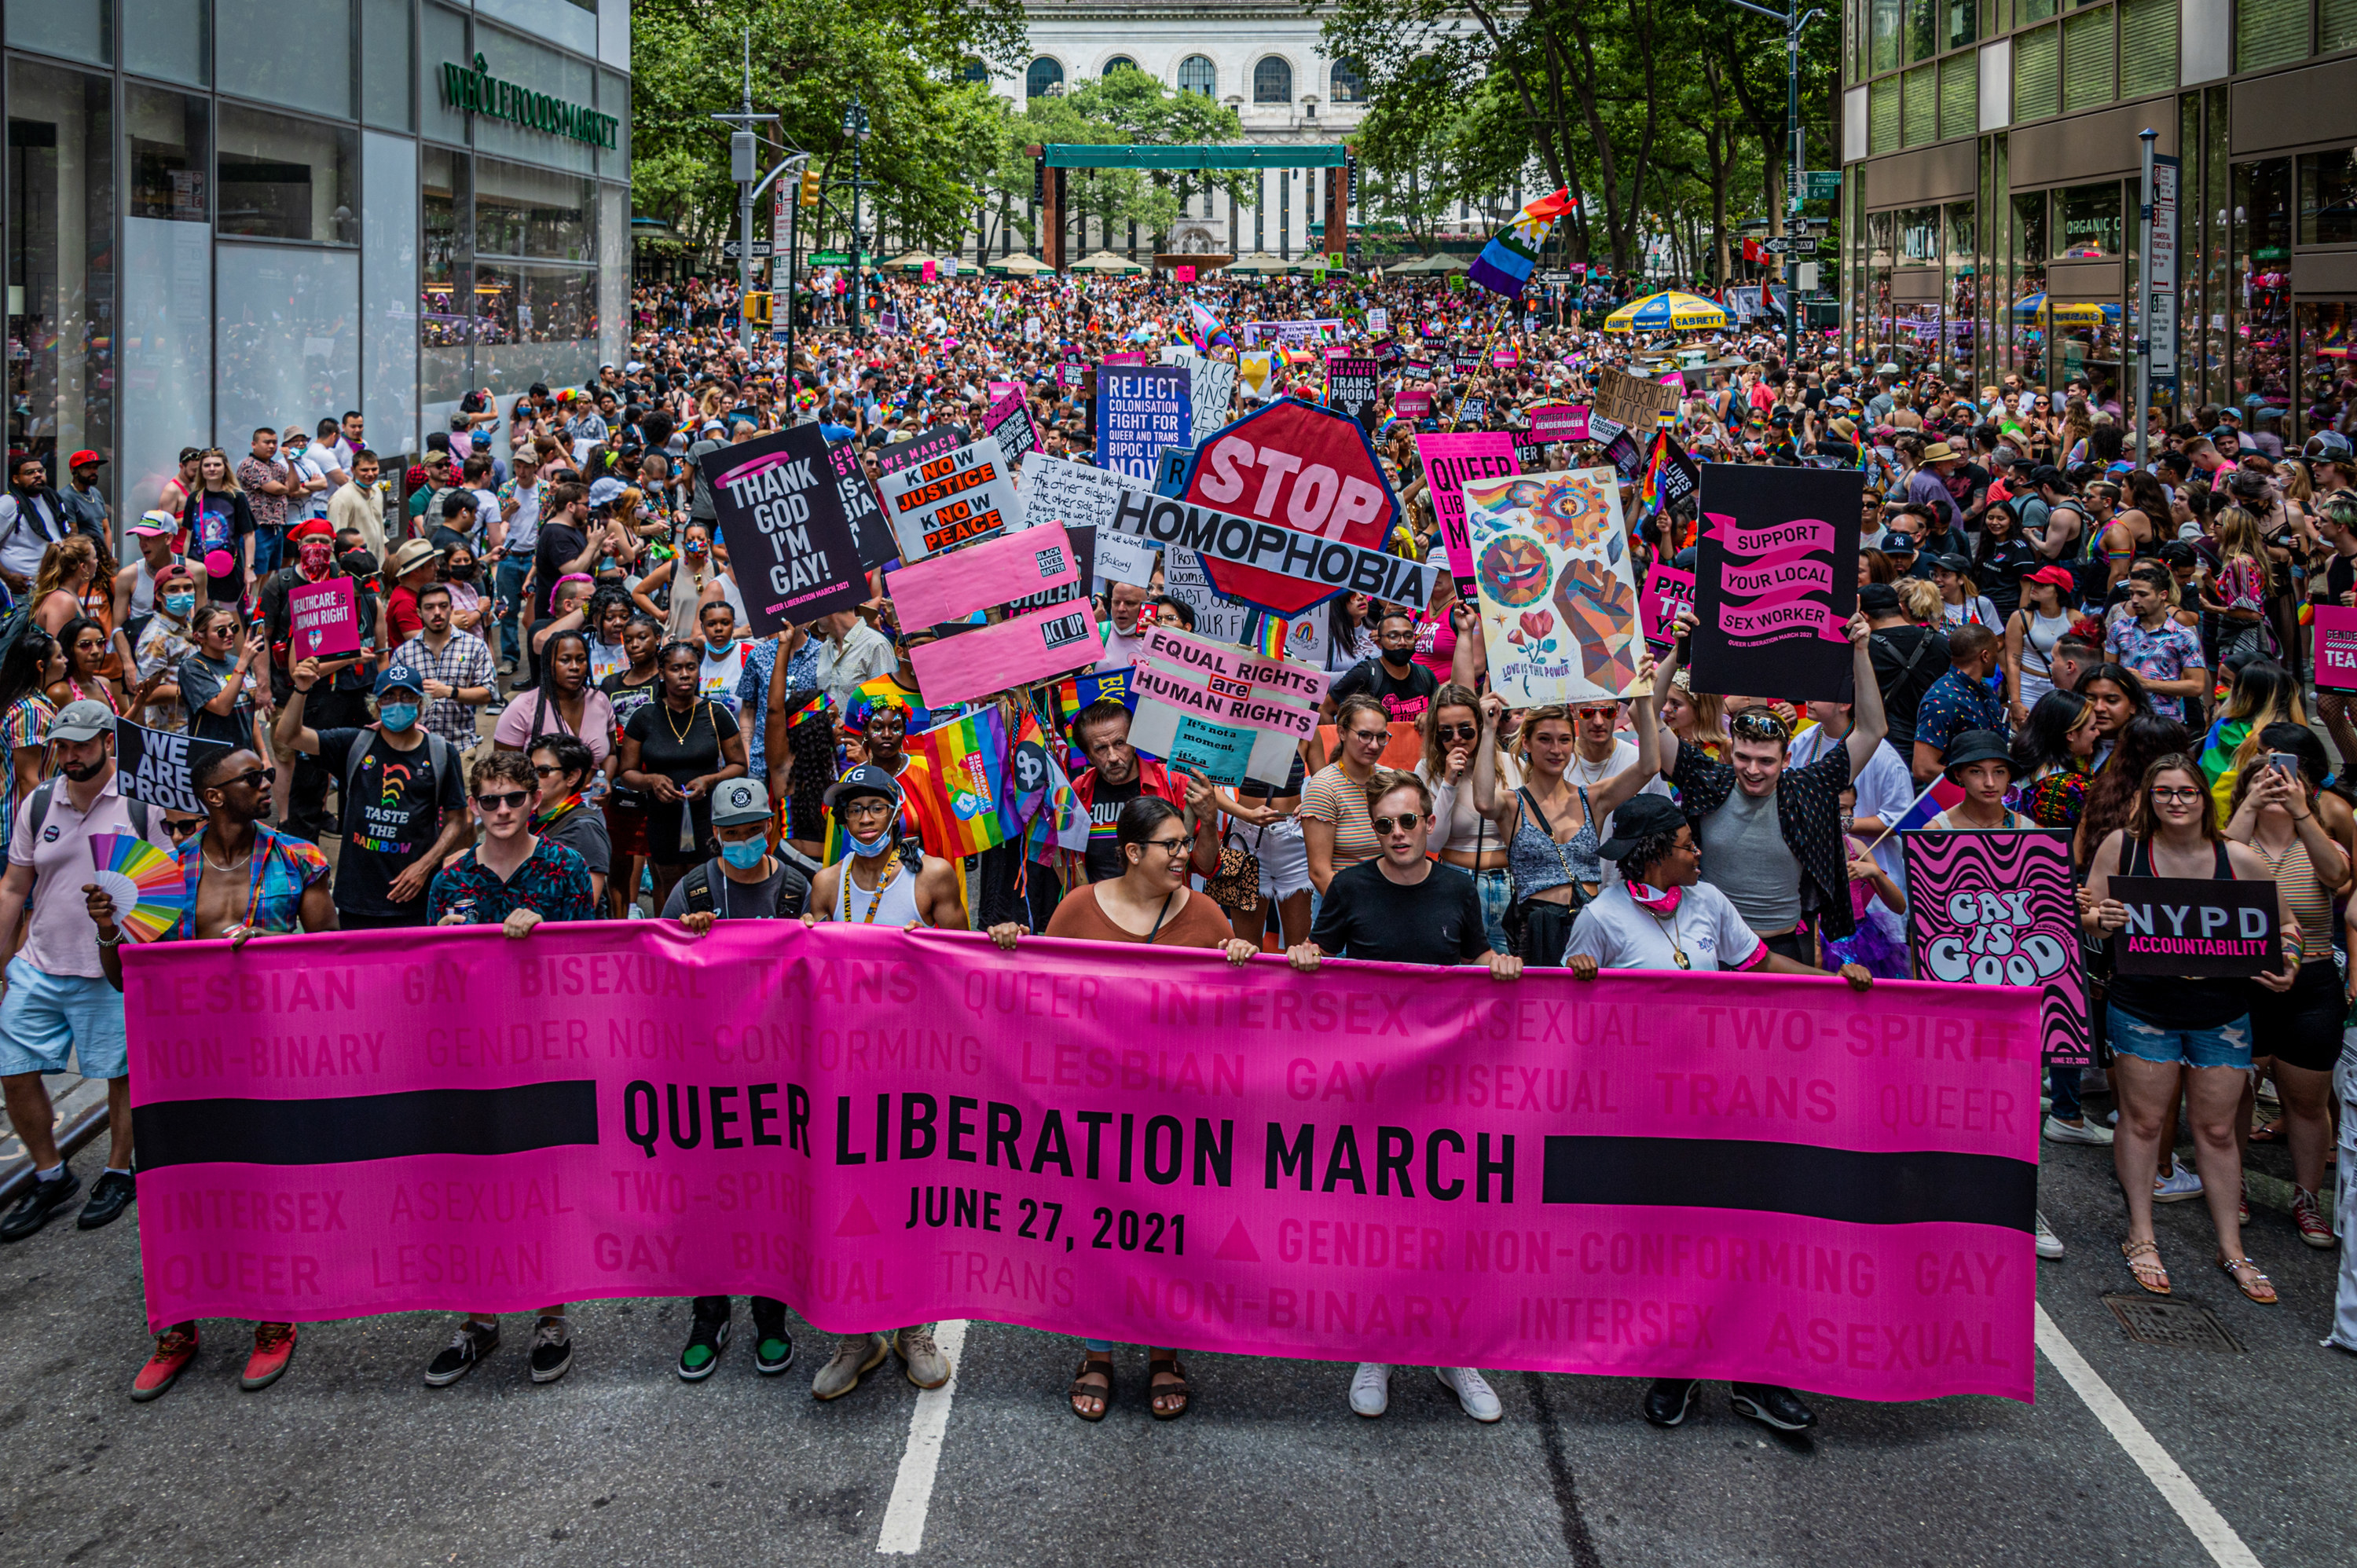 hundreds of people in Manhattan at the queer liberation march in June 2021